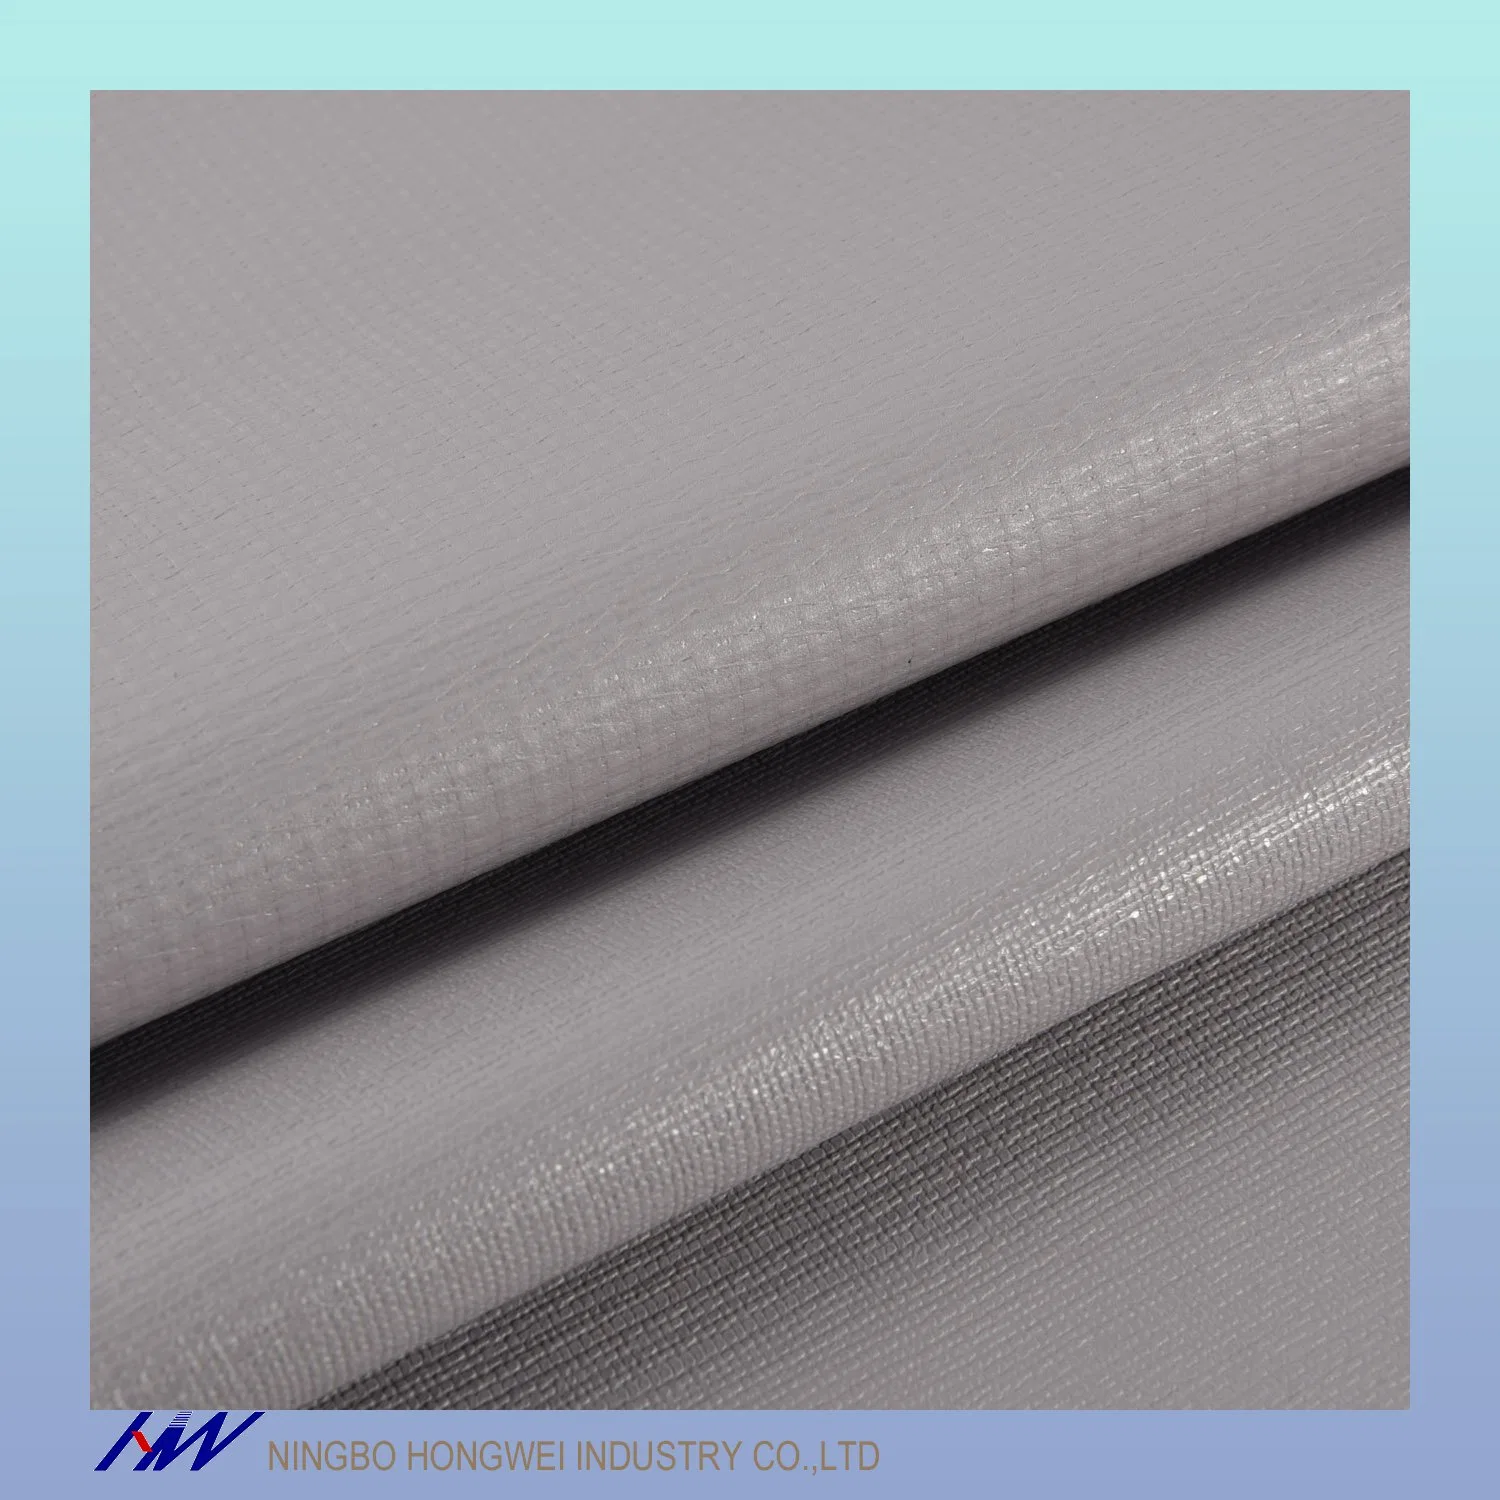 900gsm Waterproof PVC Coating Tarpaulin Fabric Material for Awning Tent Truck Cover